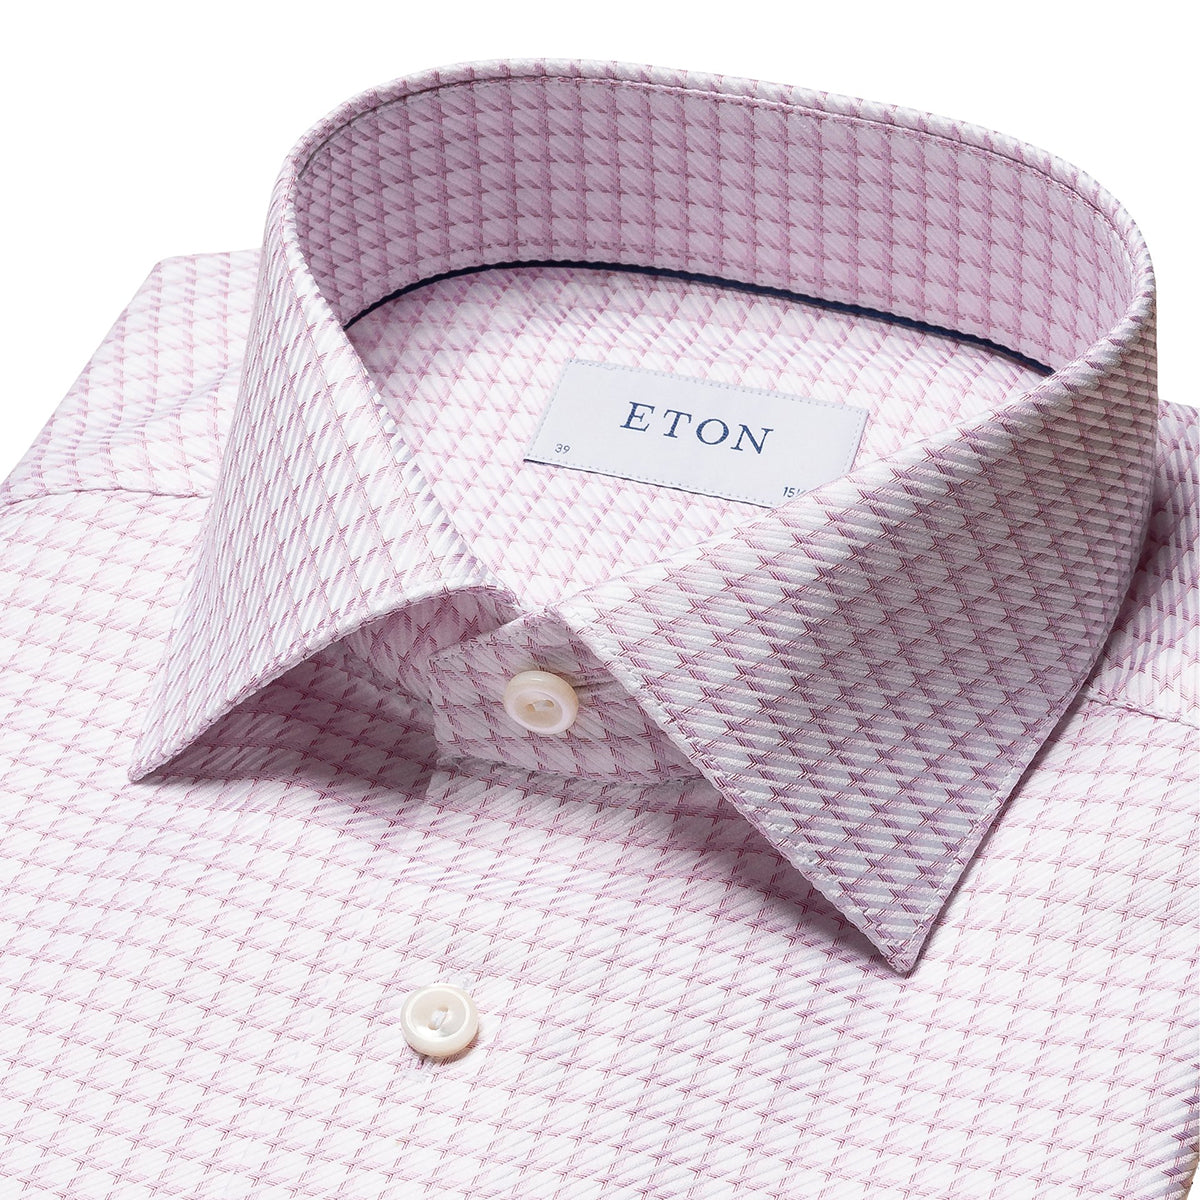 Pink Houndstooth King Twill Contemporary Fit Shirt  Eton   